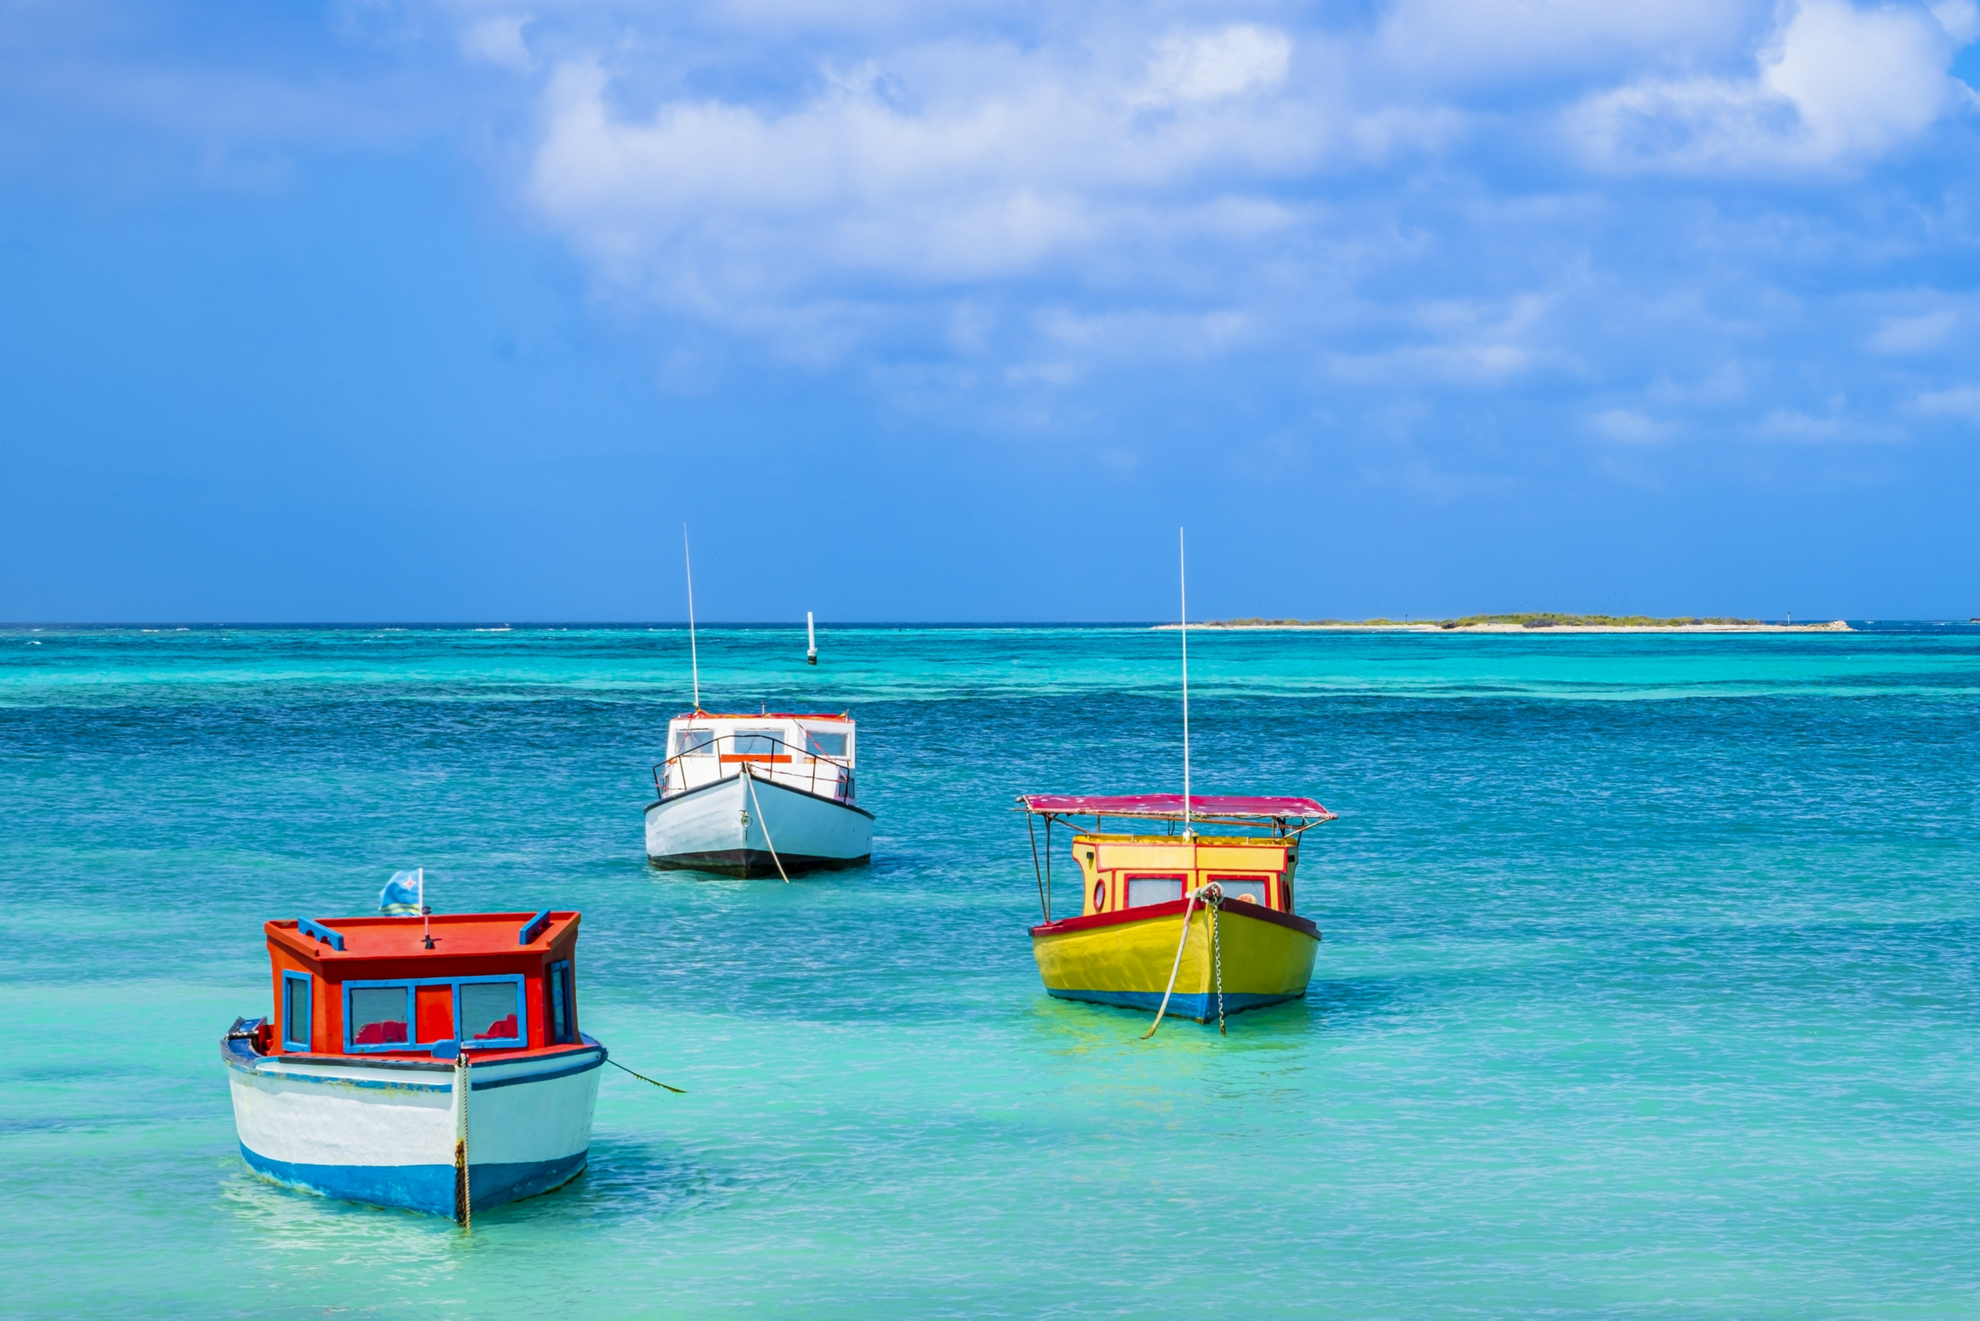 Add a splash of color to that monochrome mood with Blue Monday travel deals to Aruba